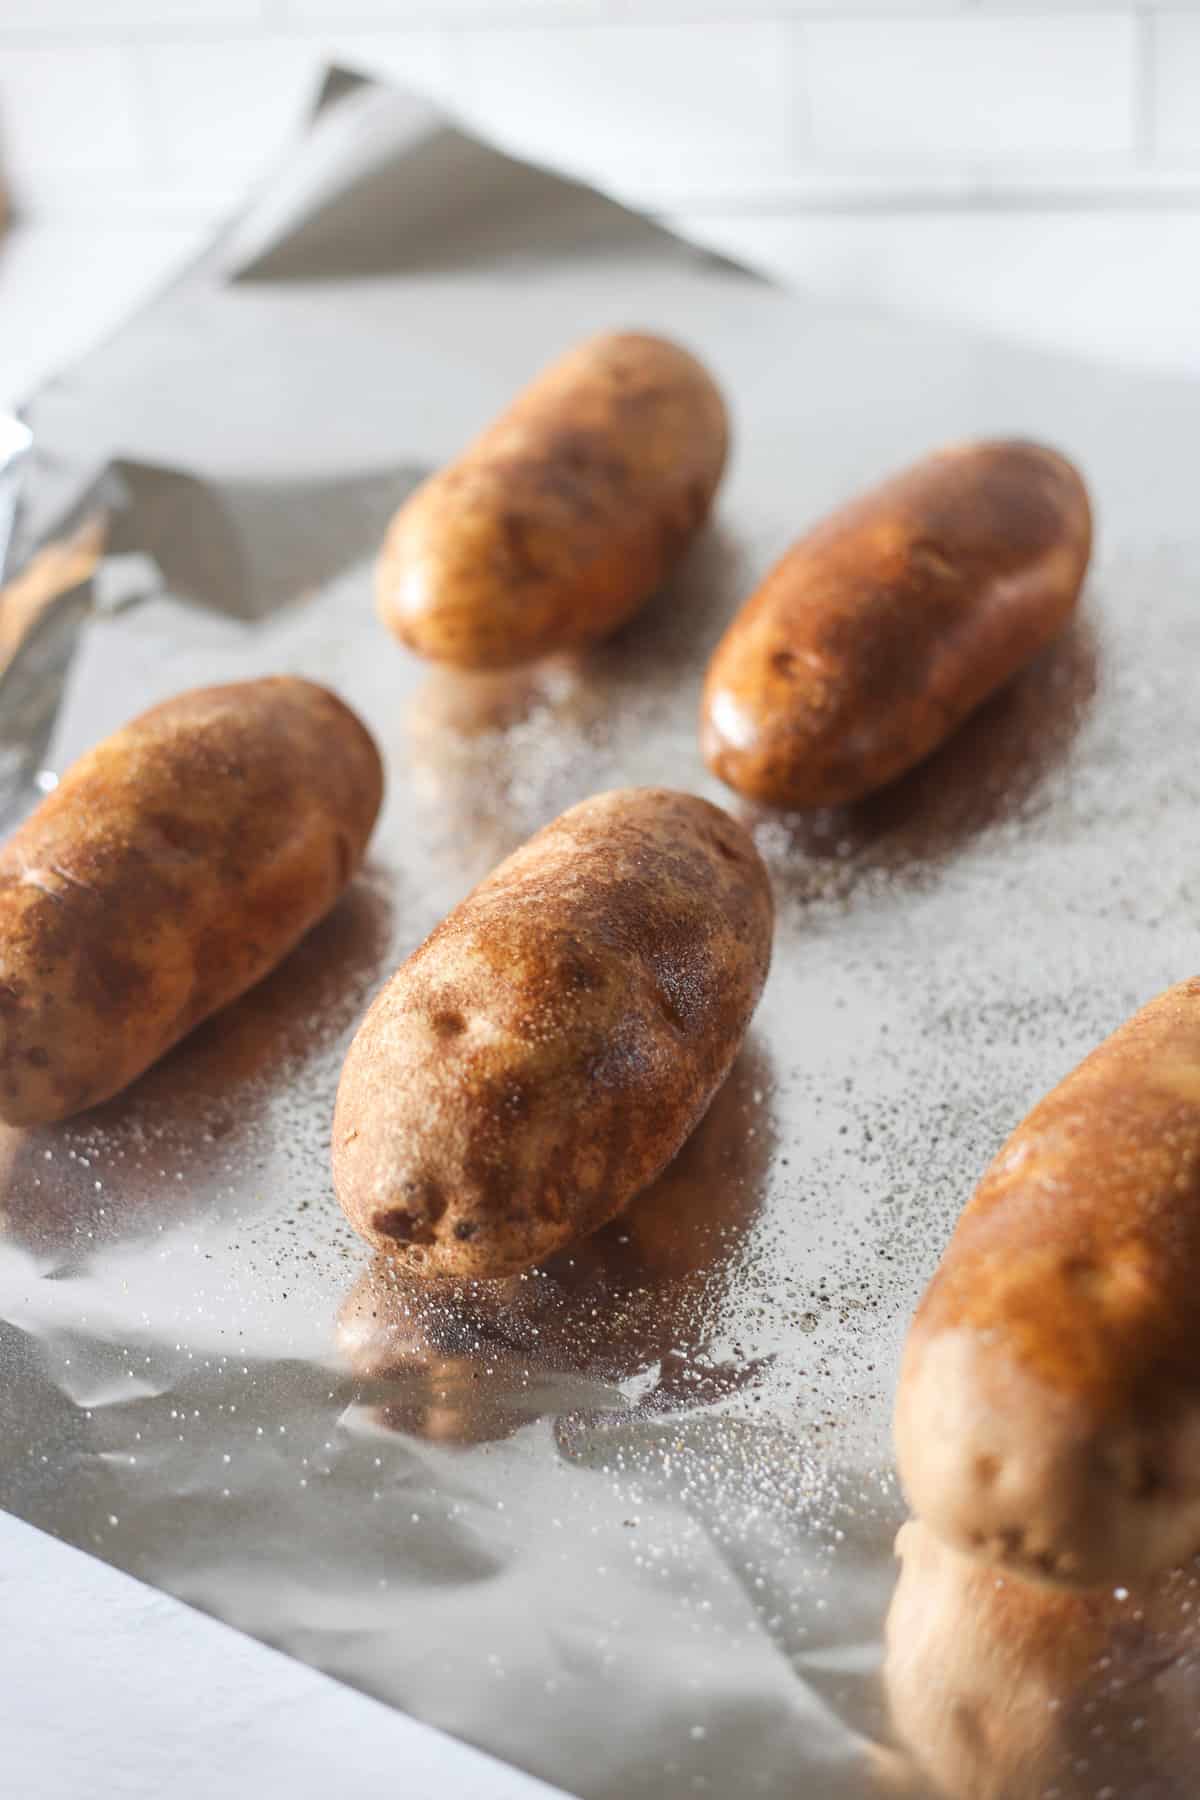 Russet Baked potatoes laid out on a foil.